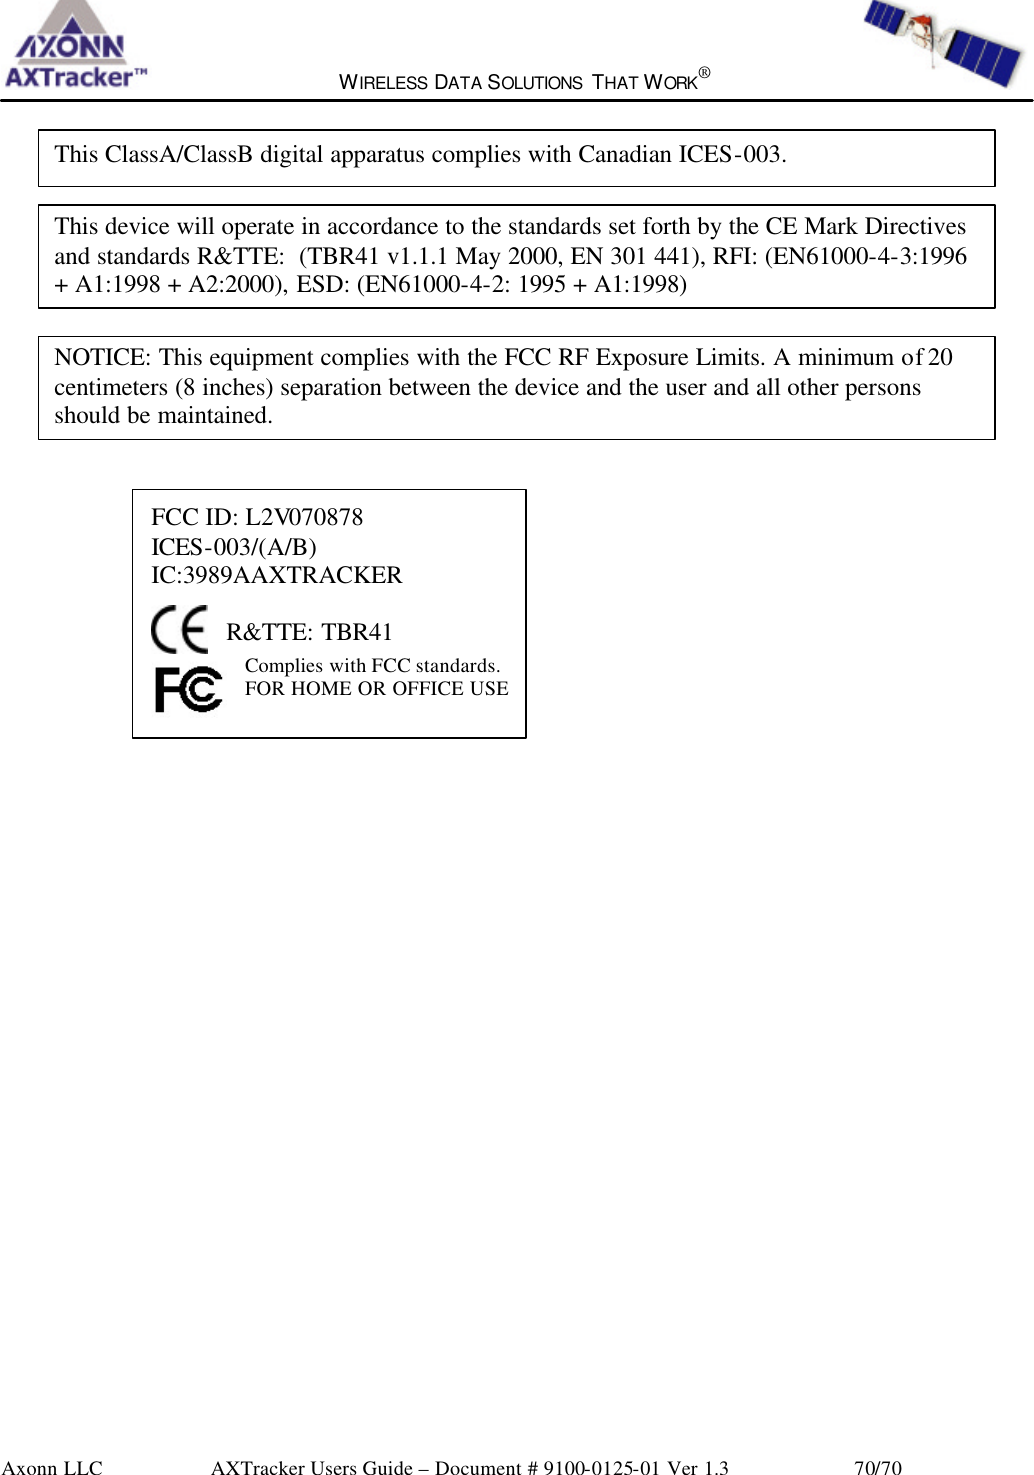  WIRELESS DATA SOLUTIONS THAT WORK®   Axonn LLC        AXTracker Users Guide – Document # 9100-0125-01 Ver 1.3                 70/70              FCC ID: L2V070878 ICES-003/(A/B) IC:3989AAXTRACKER   R&amp;TTE: TBR41 Complies with FCC standards.  FOR HOME OR OFFICE USE    This device will operate in accordance to the standards set forth by the CE Mark Directives and standards R&amp;TTE:  (TBR41 v1.1.1 May 2000, EN 301 441), RFI: (EN61000-4-3:1996 + A1:1998 + A2:2000), ESD: (EN61000-4-2: 1995 + A1:1998) This ClassA/ClassB digital apparatus complies with Canadian ICES-003. NOTICE: This equipment complies with the FCC RF Exposure Limits. A minimum of 20 centimeters (8 inches) separation between the device and the user and all other persons should be maintained. 